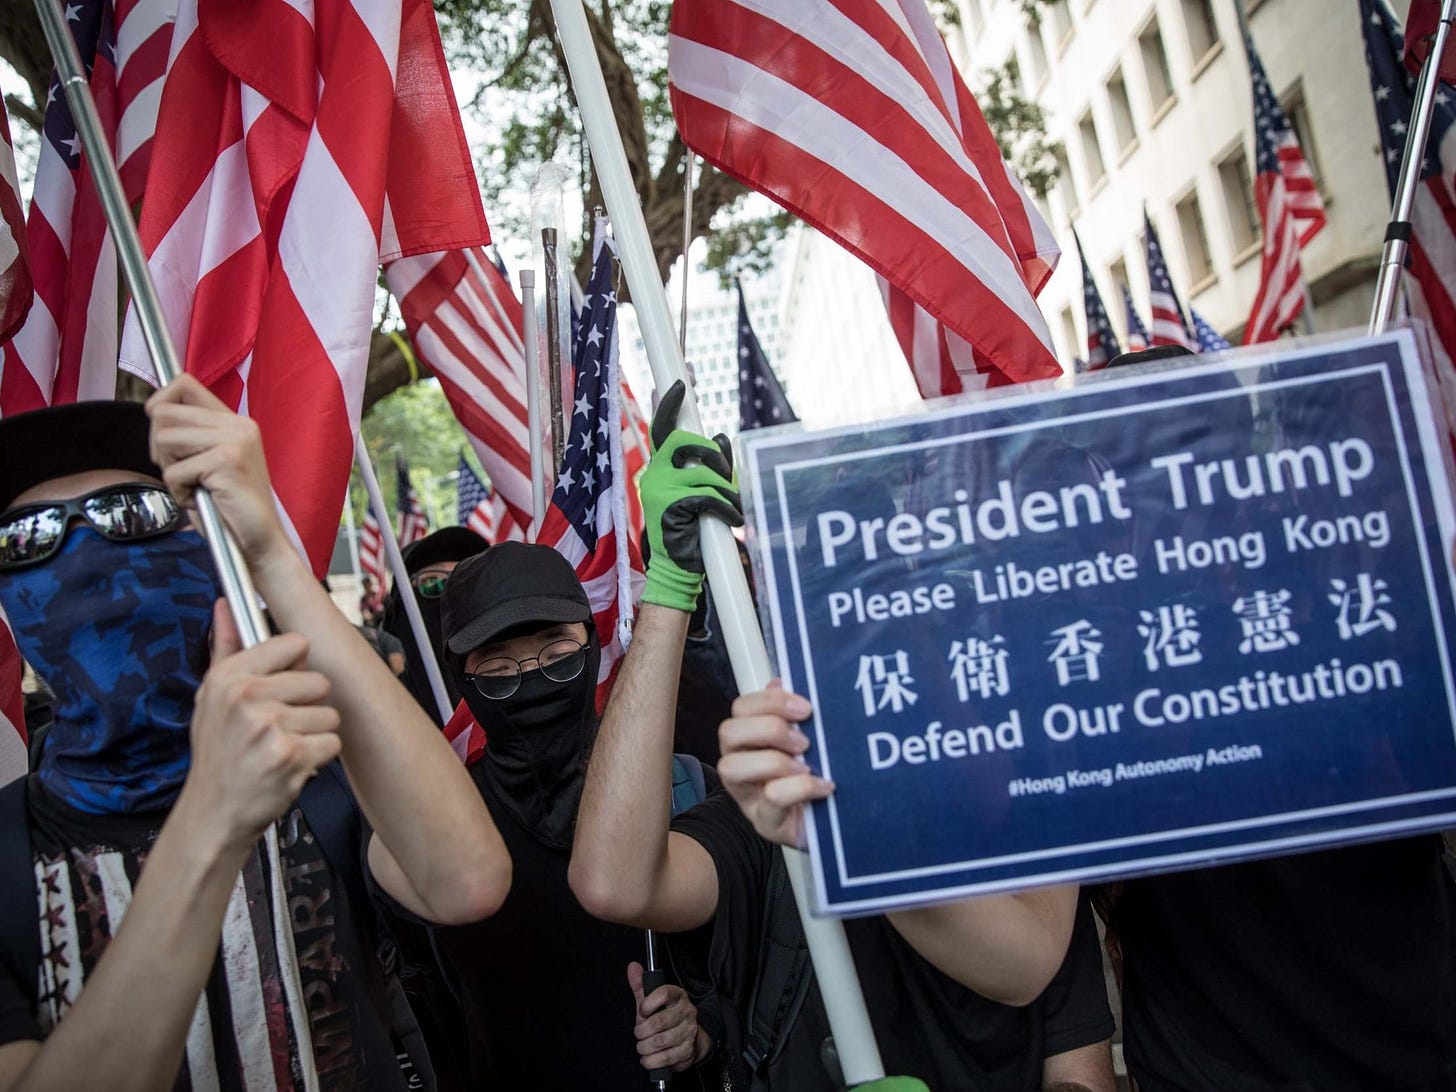 Hong Kong protesters, waving American flags, call on Trump to 'liberate ...